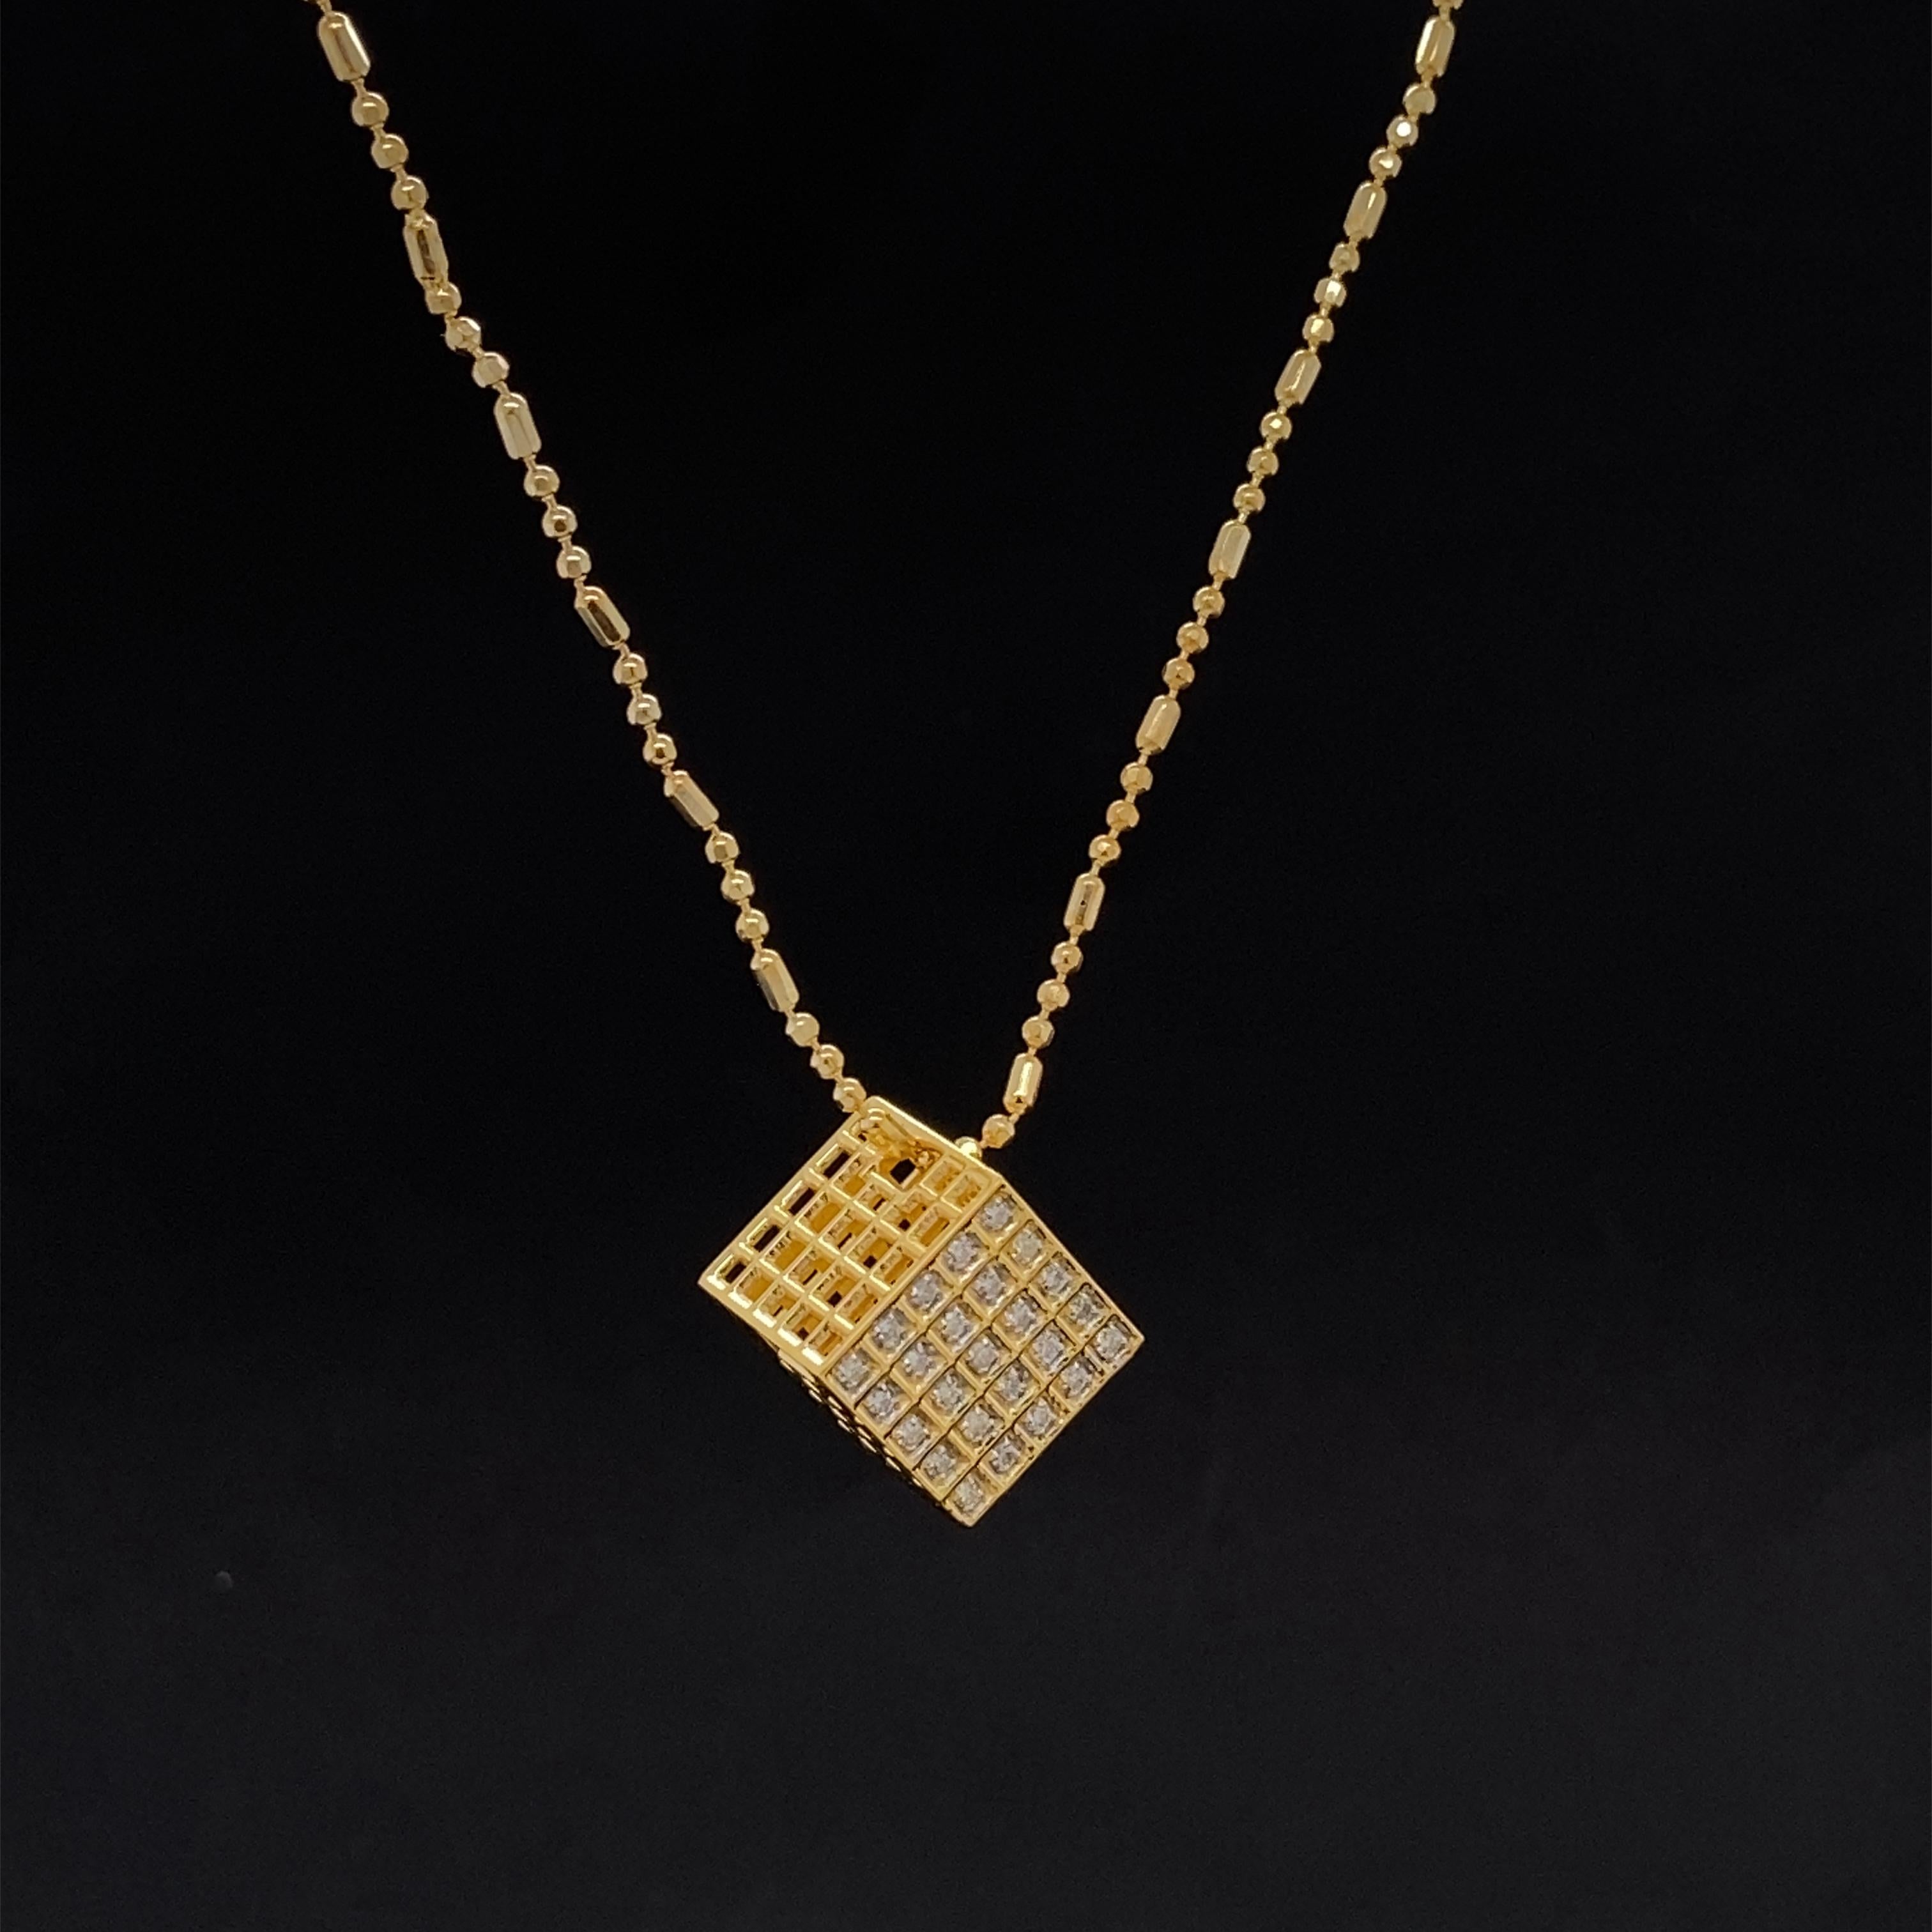 3D Solid Cube Diamond Pendant in 18k Solid Gold For Sale 3